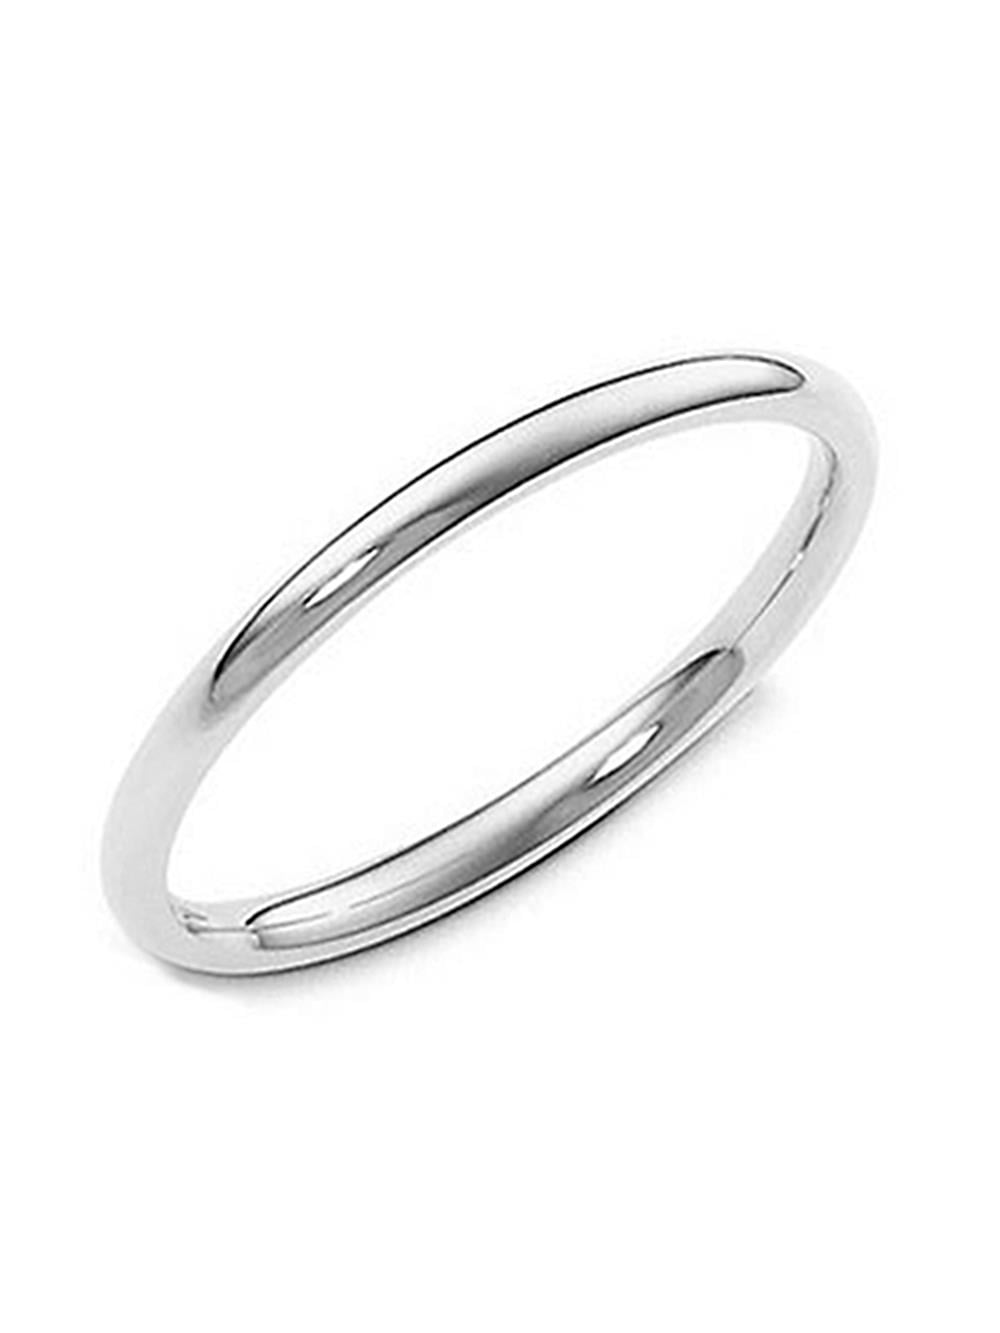 Sterling Silver 4 mm Wide Musical Notes Band Ring Free Gift Packaging 